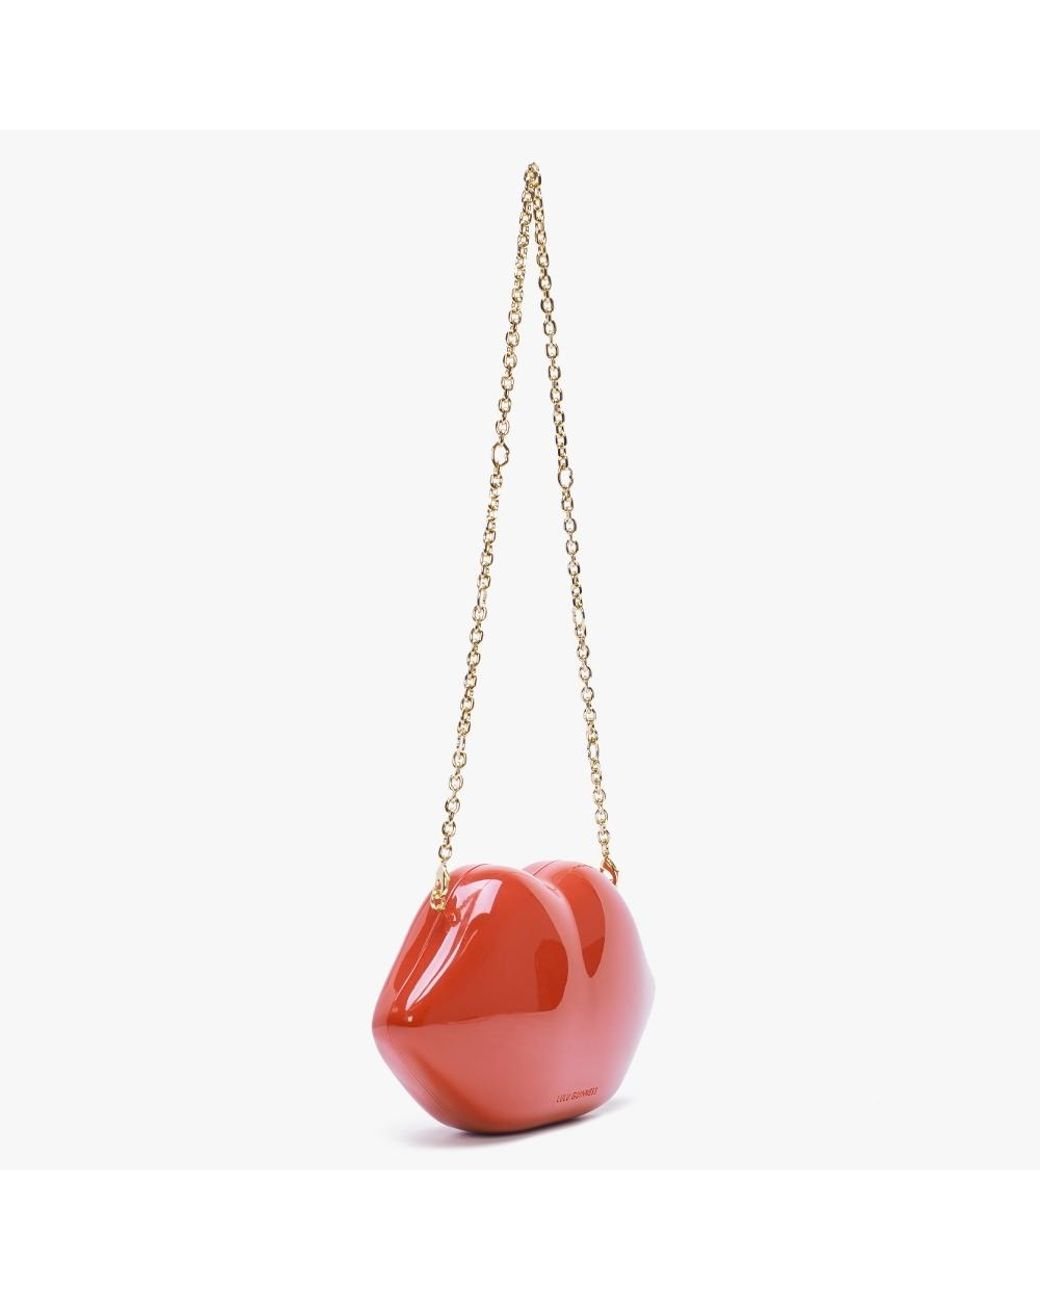 Lulu Guinness Small Red Lips Clutch Bag